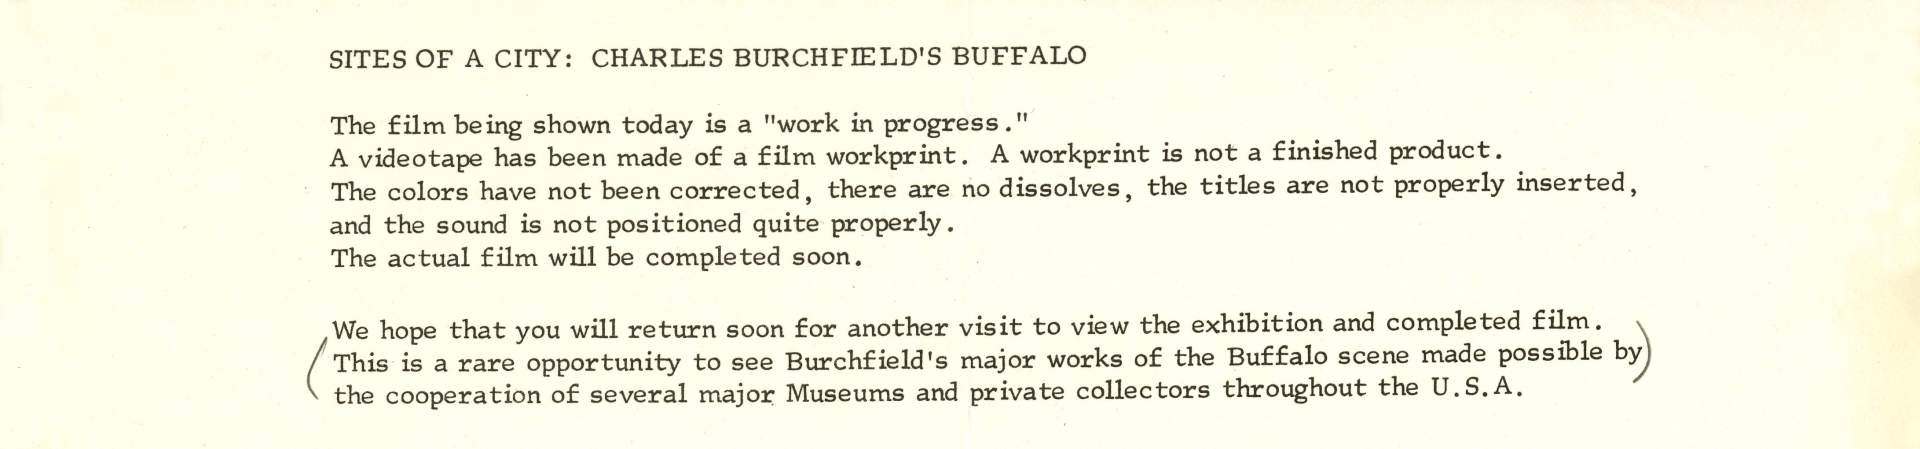 "Sites Of A City: Charles Burchfield's Buffalo" 1976 Film Text